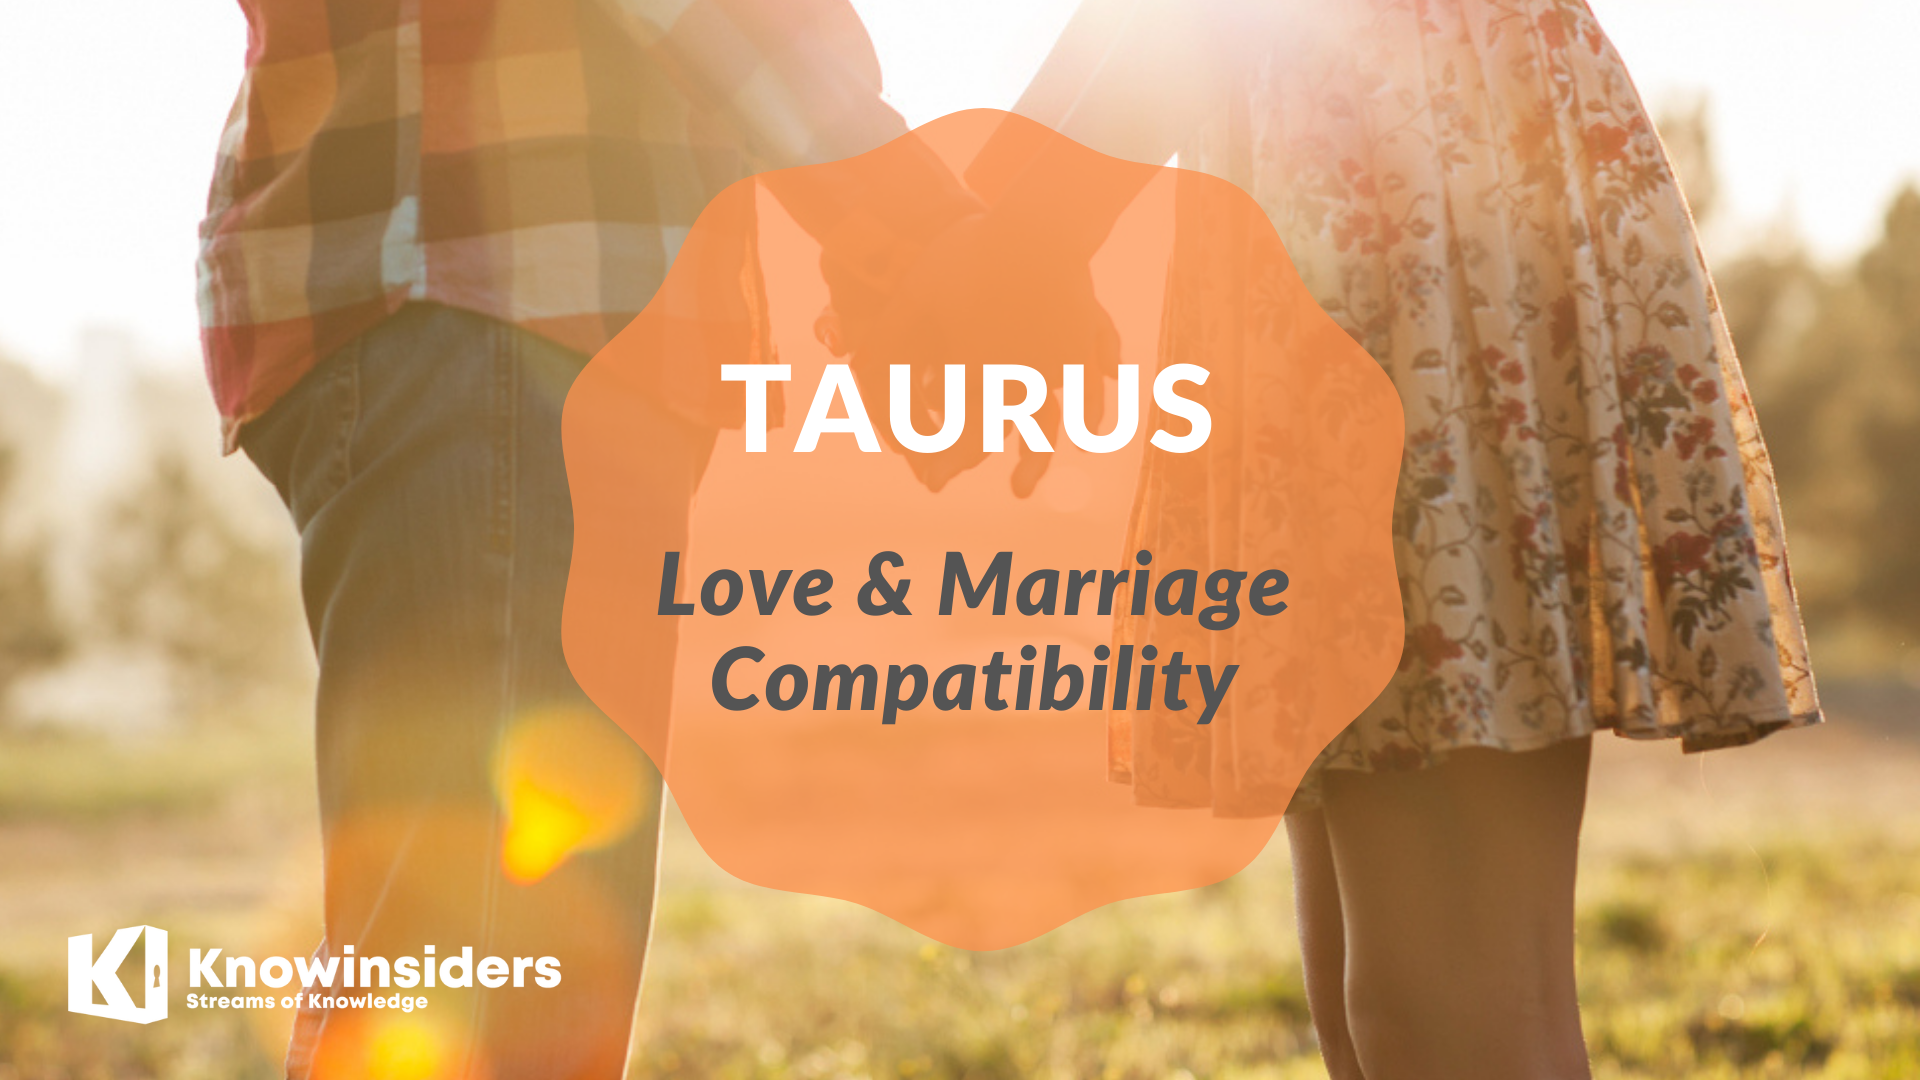 TAURUS - Top 3 Most Compatible Zodiac Signs for Love & Marriage